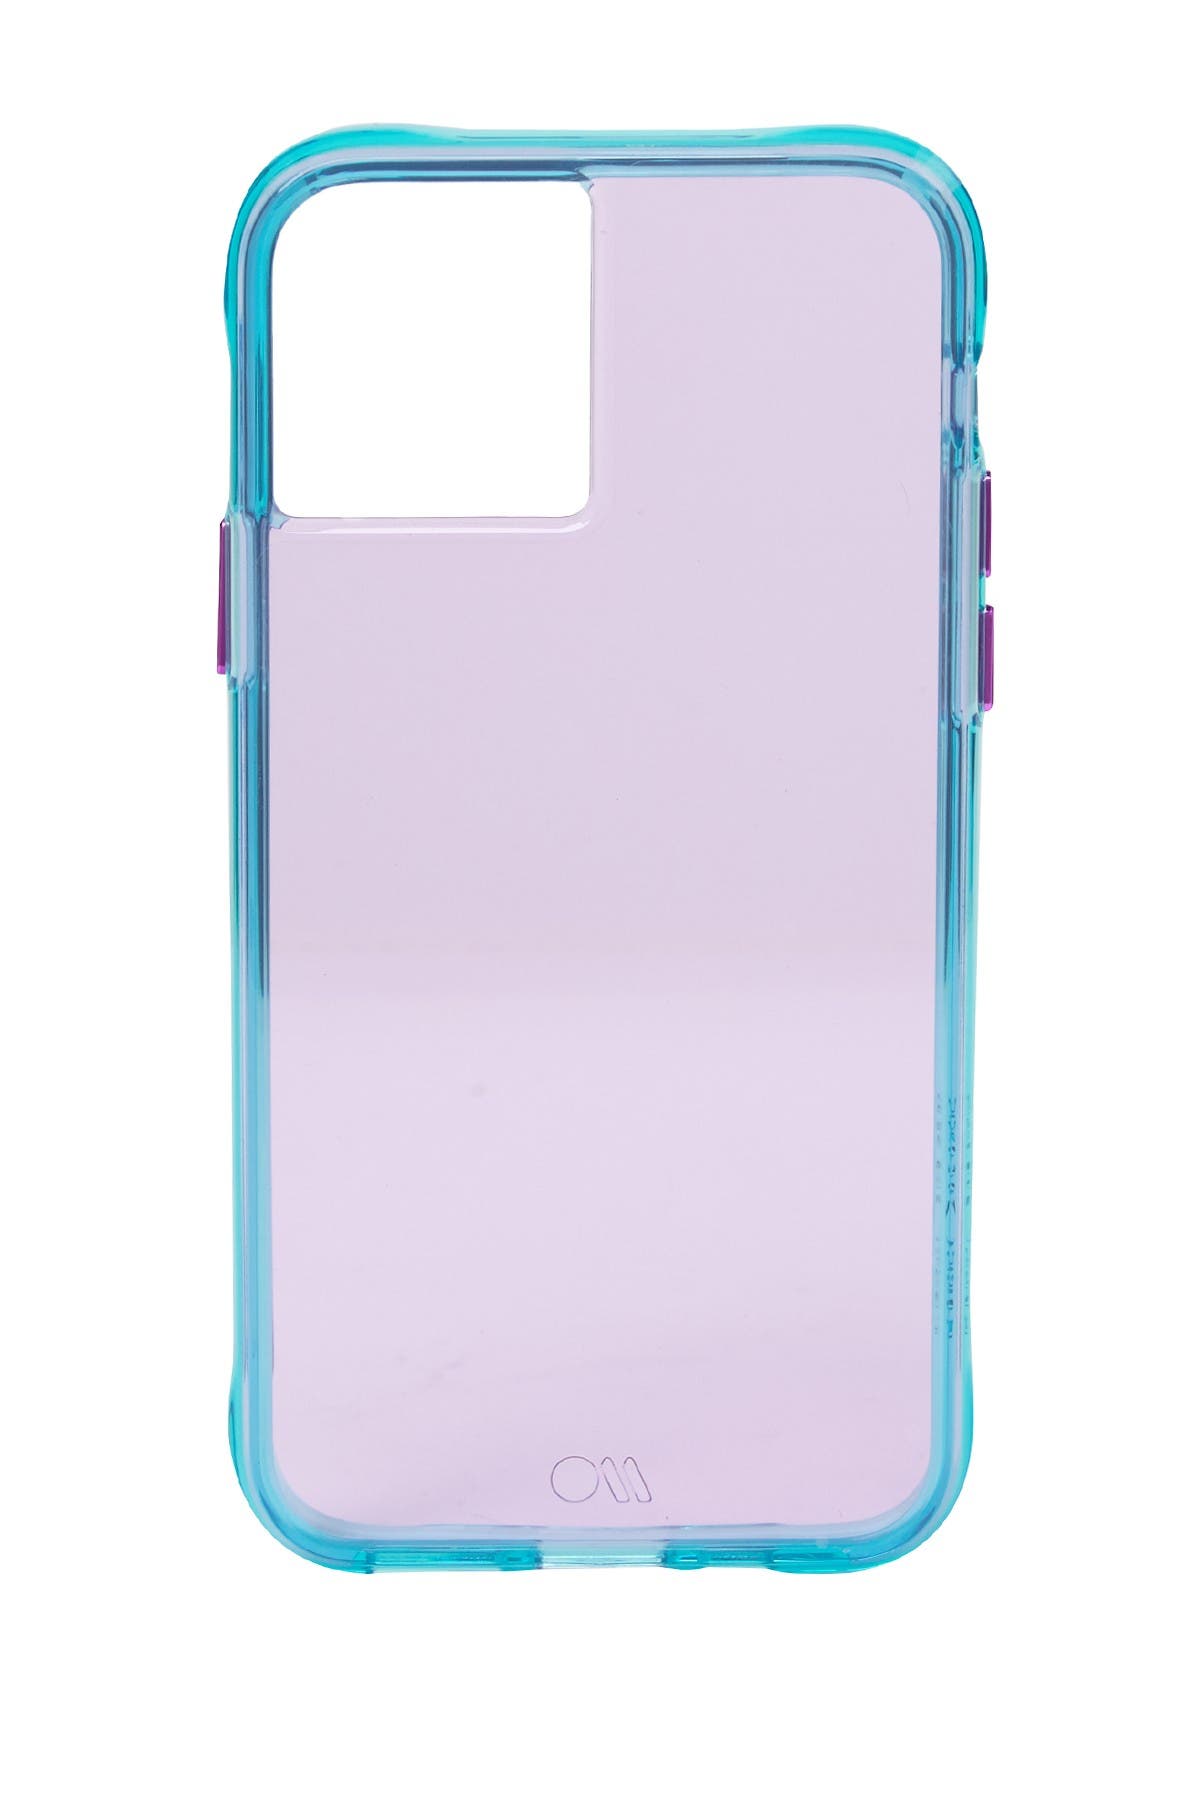 Case-mate Iphone 11 Pro Tough Neon In Purple/turquoise Neon